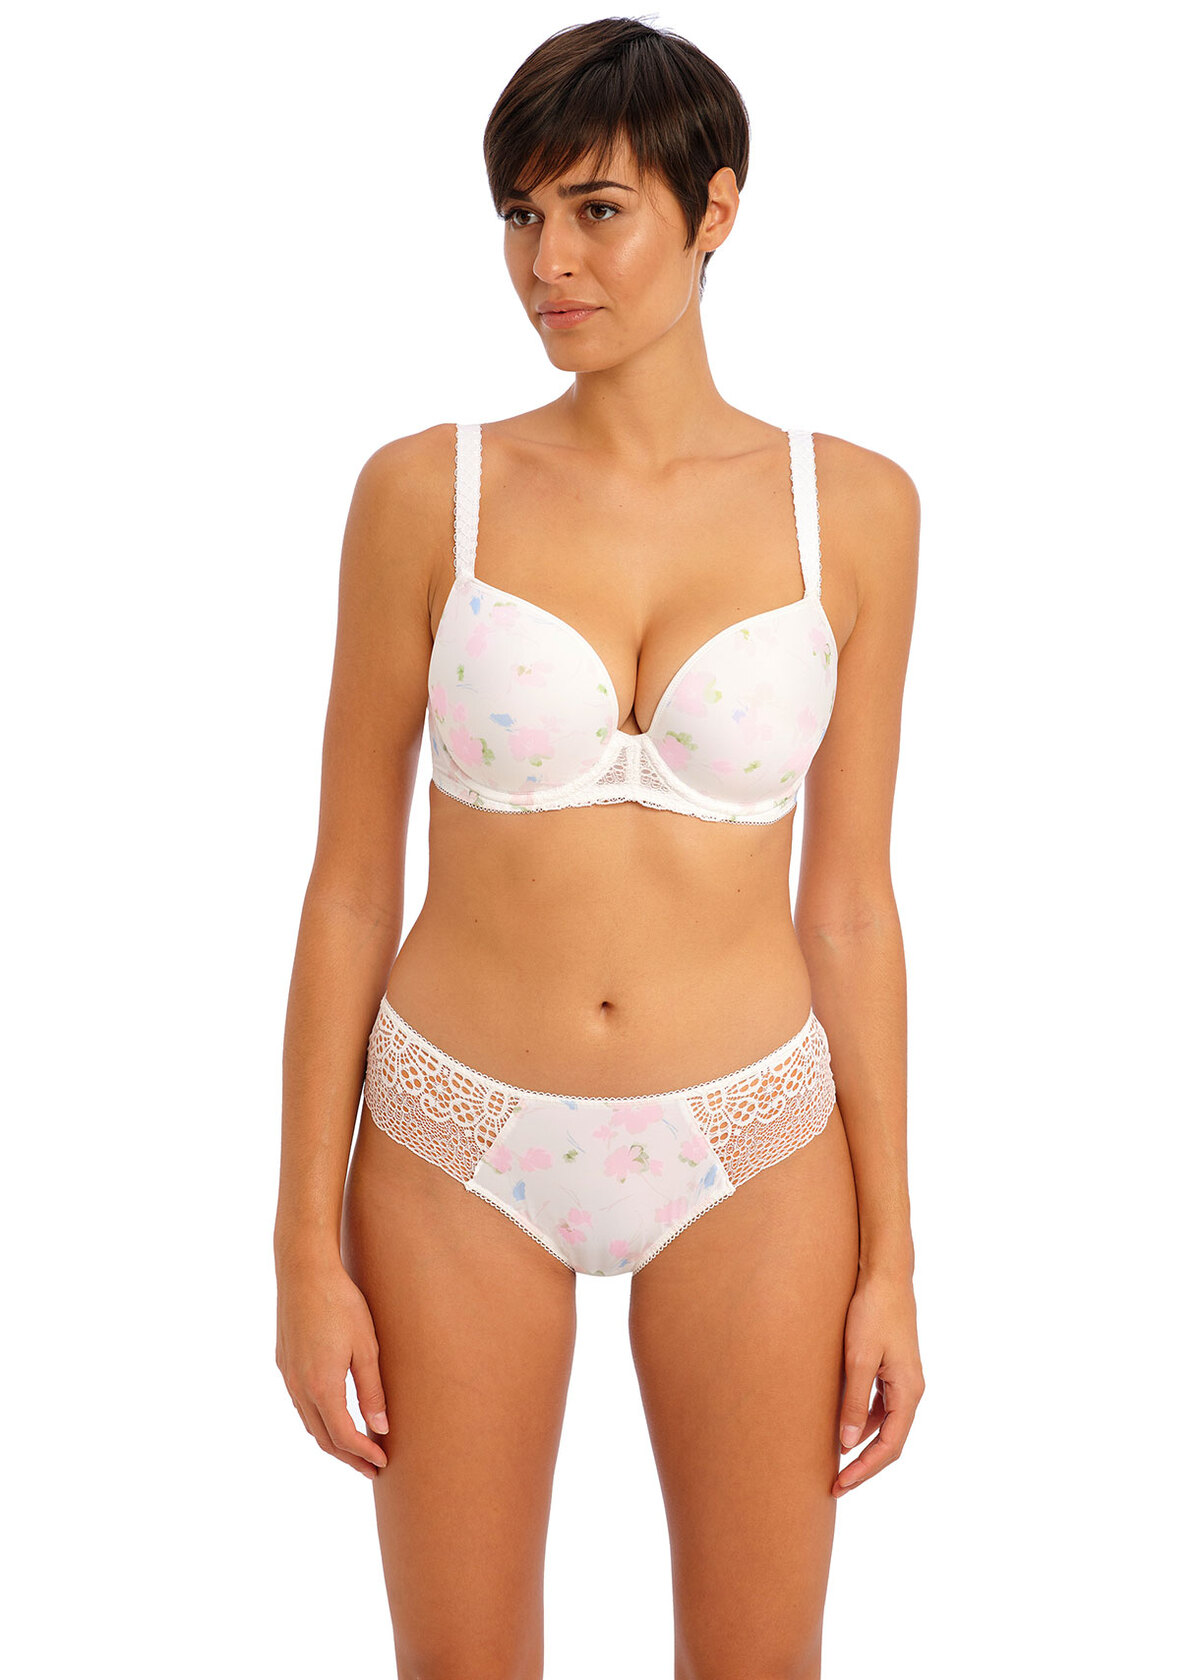 https://caloncariad.co.uk/wp-content/uploads/2023/05/AA400831-FLT-alt1-Freya-Lingerie-Daydreaming-Floral-White-Underwired-Moulded-Plunge-T-Shirt-Bra.jpg